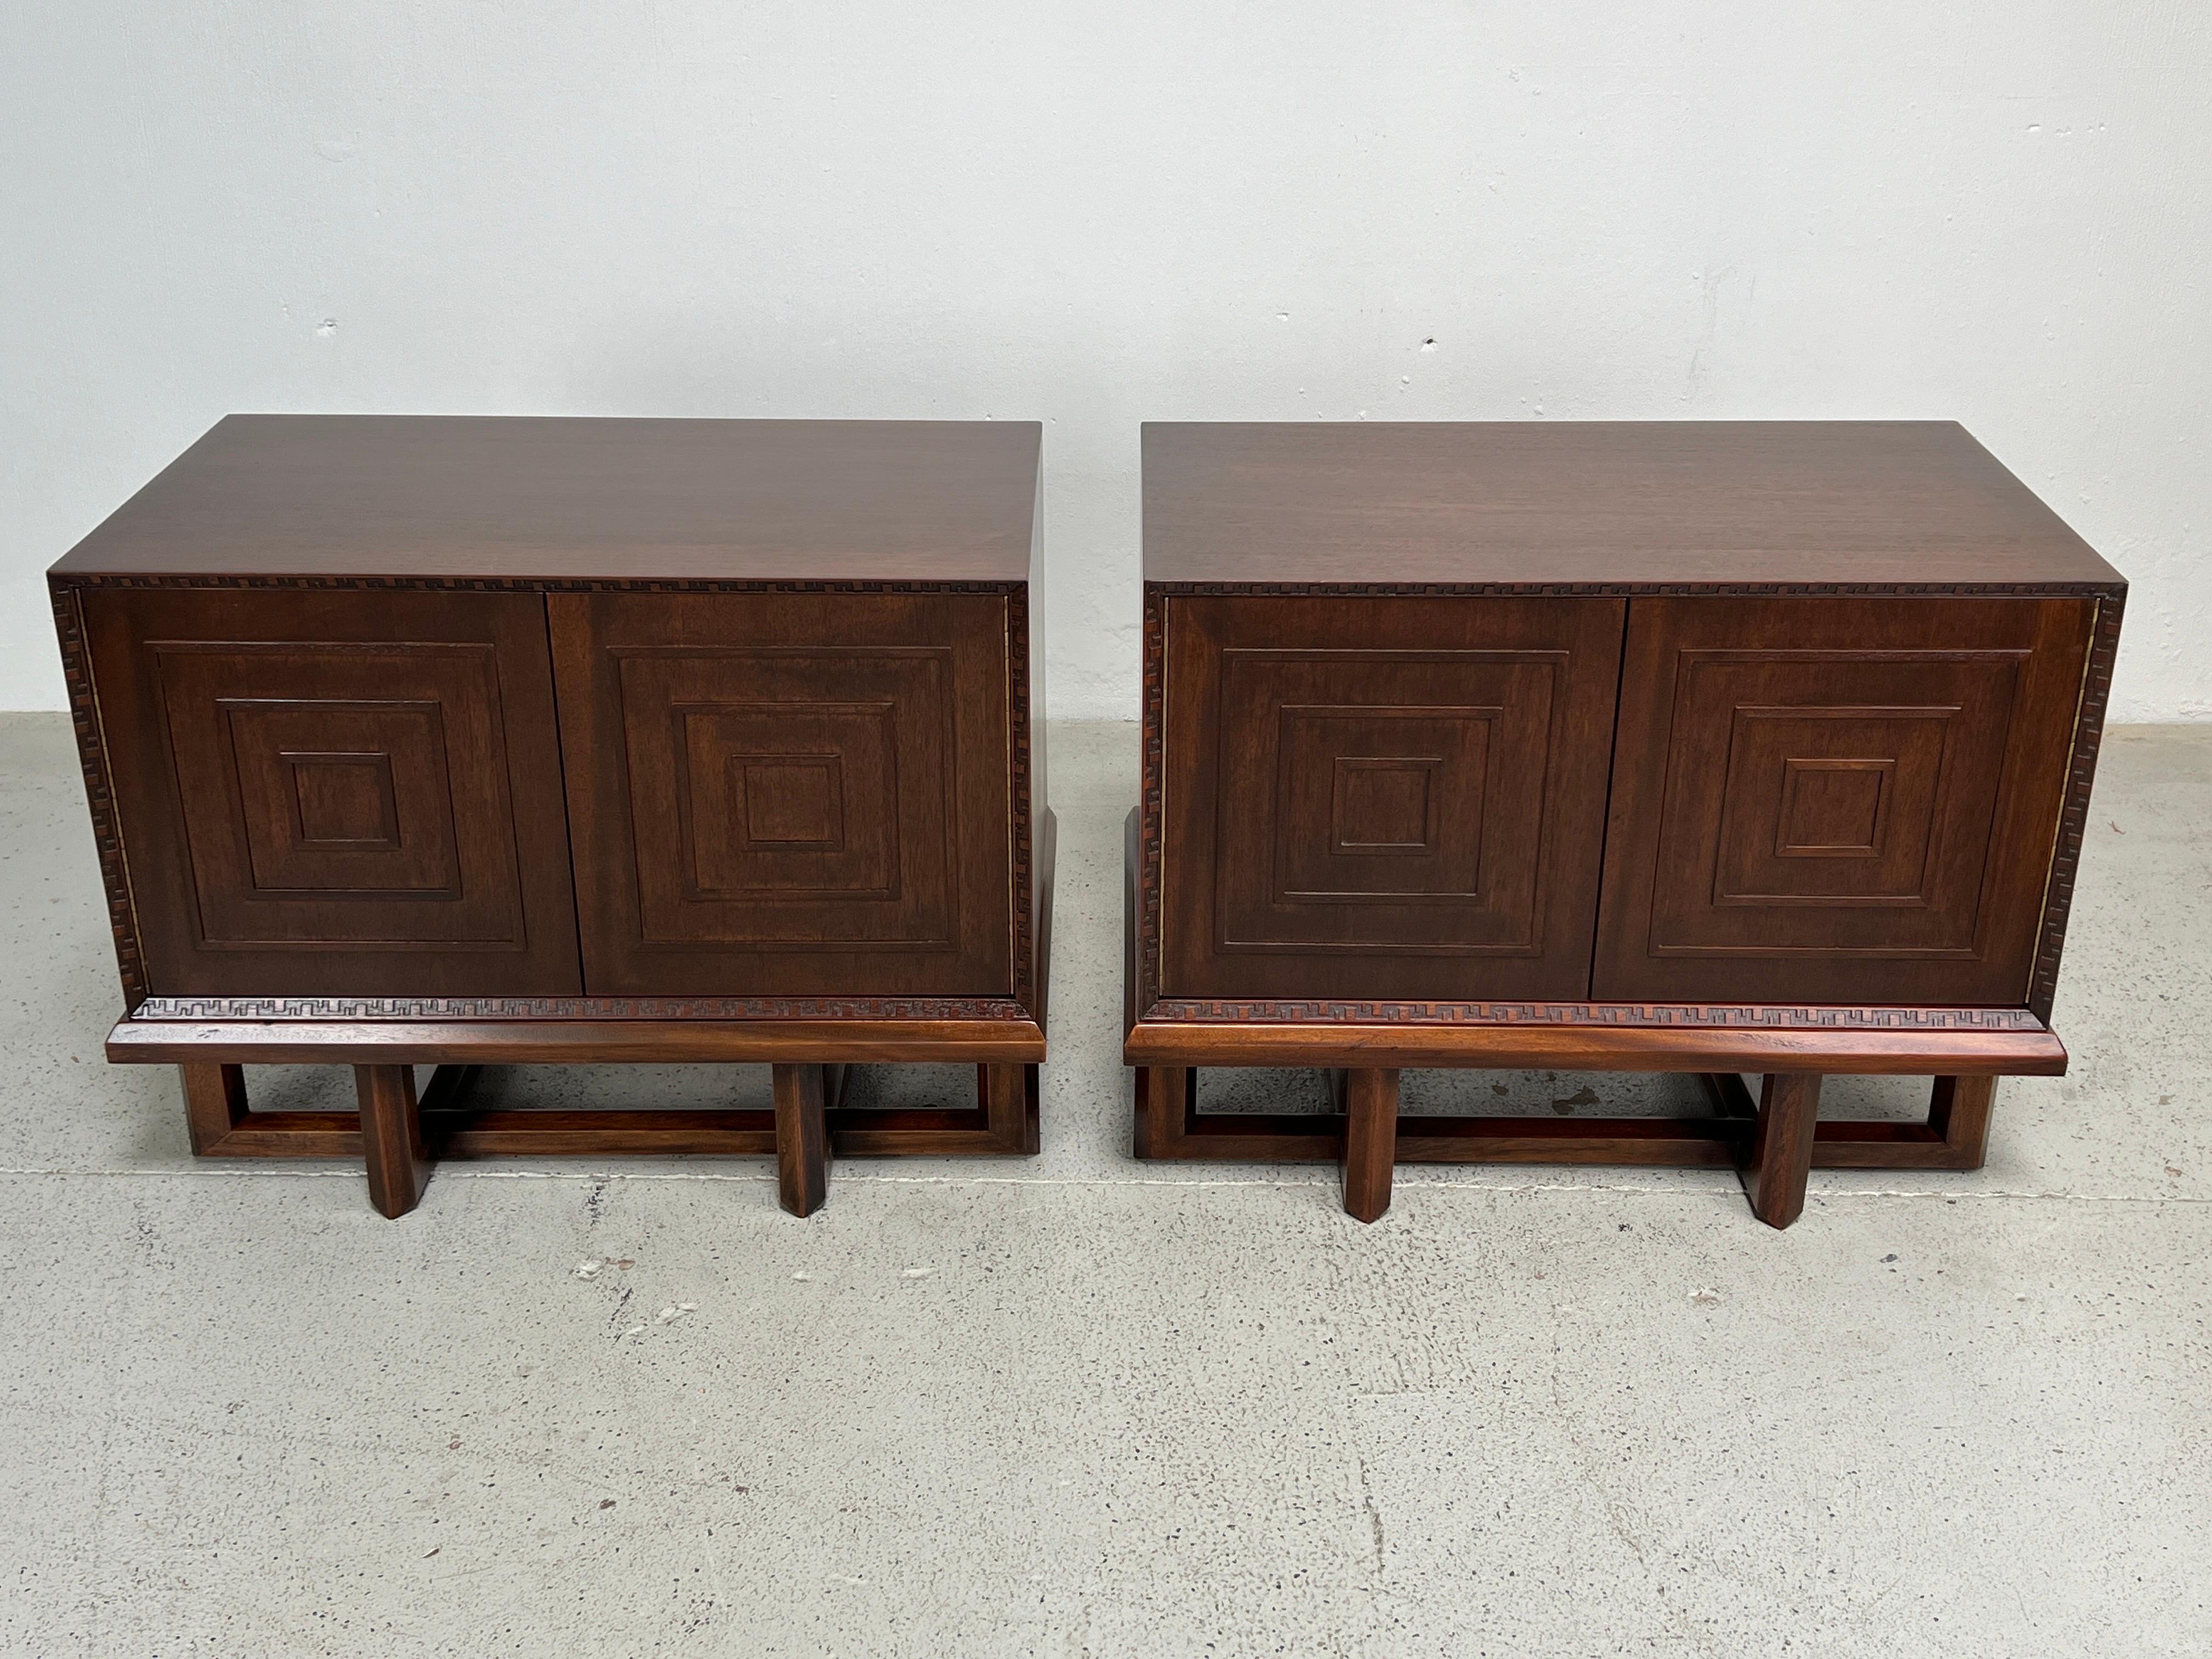 Mid-20th Century Pair of Cabinets / Nightstands by Frank Lloyd Wright for Henredon